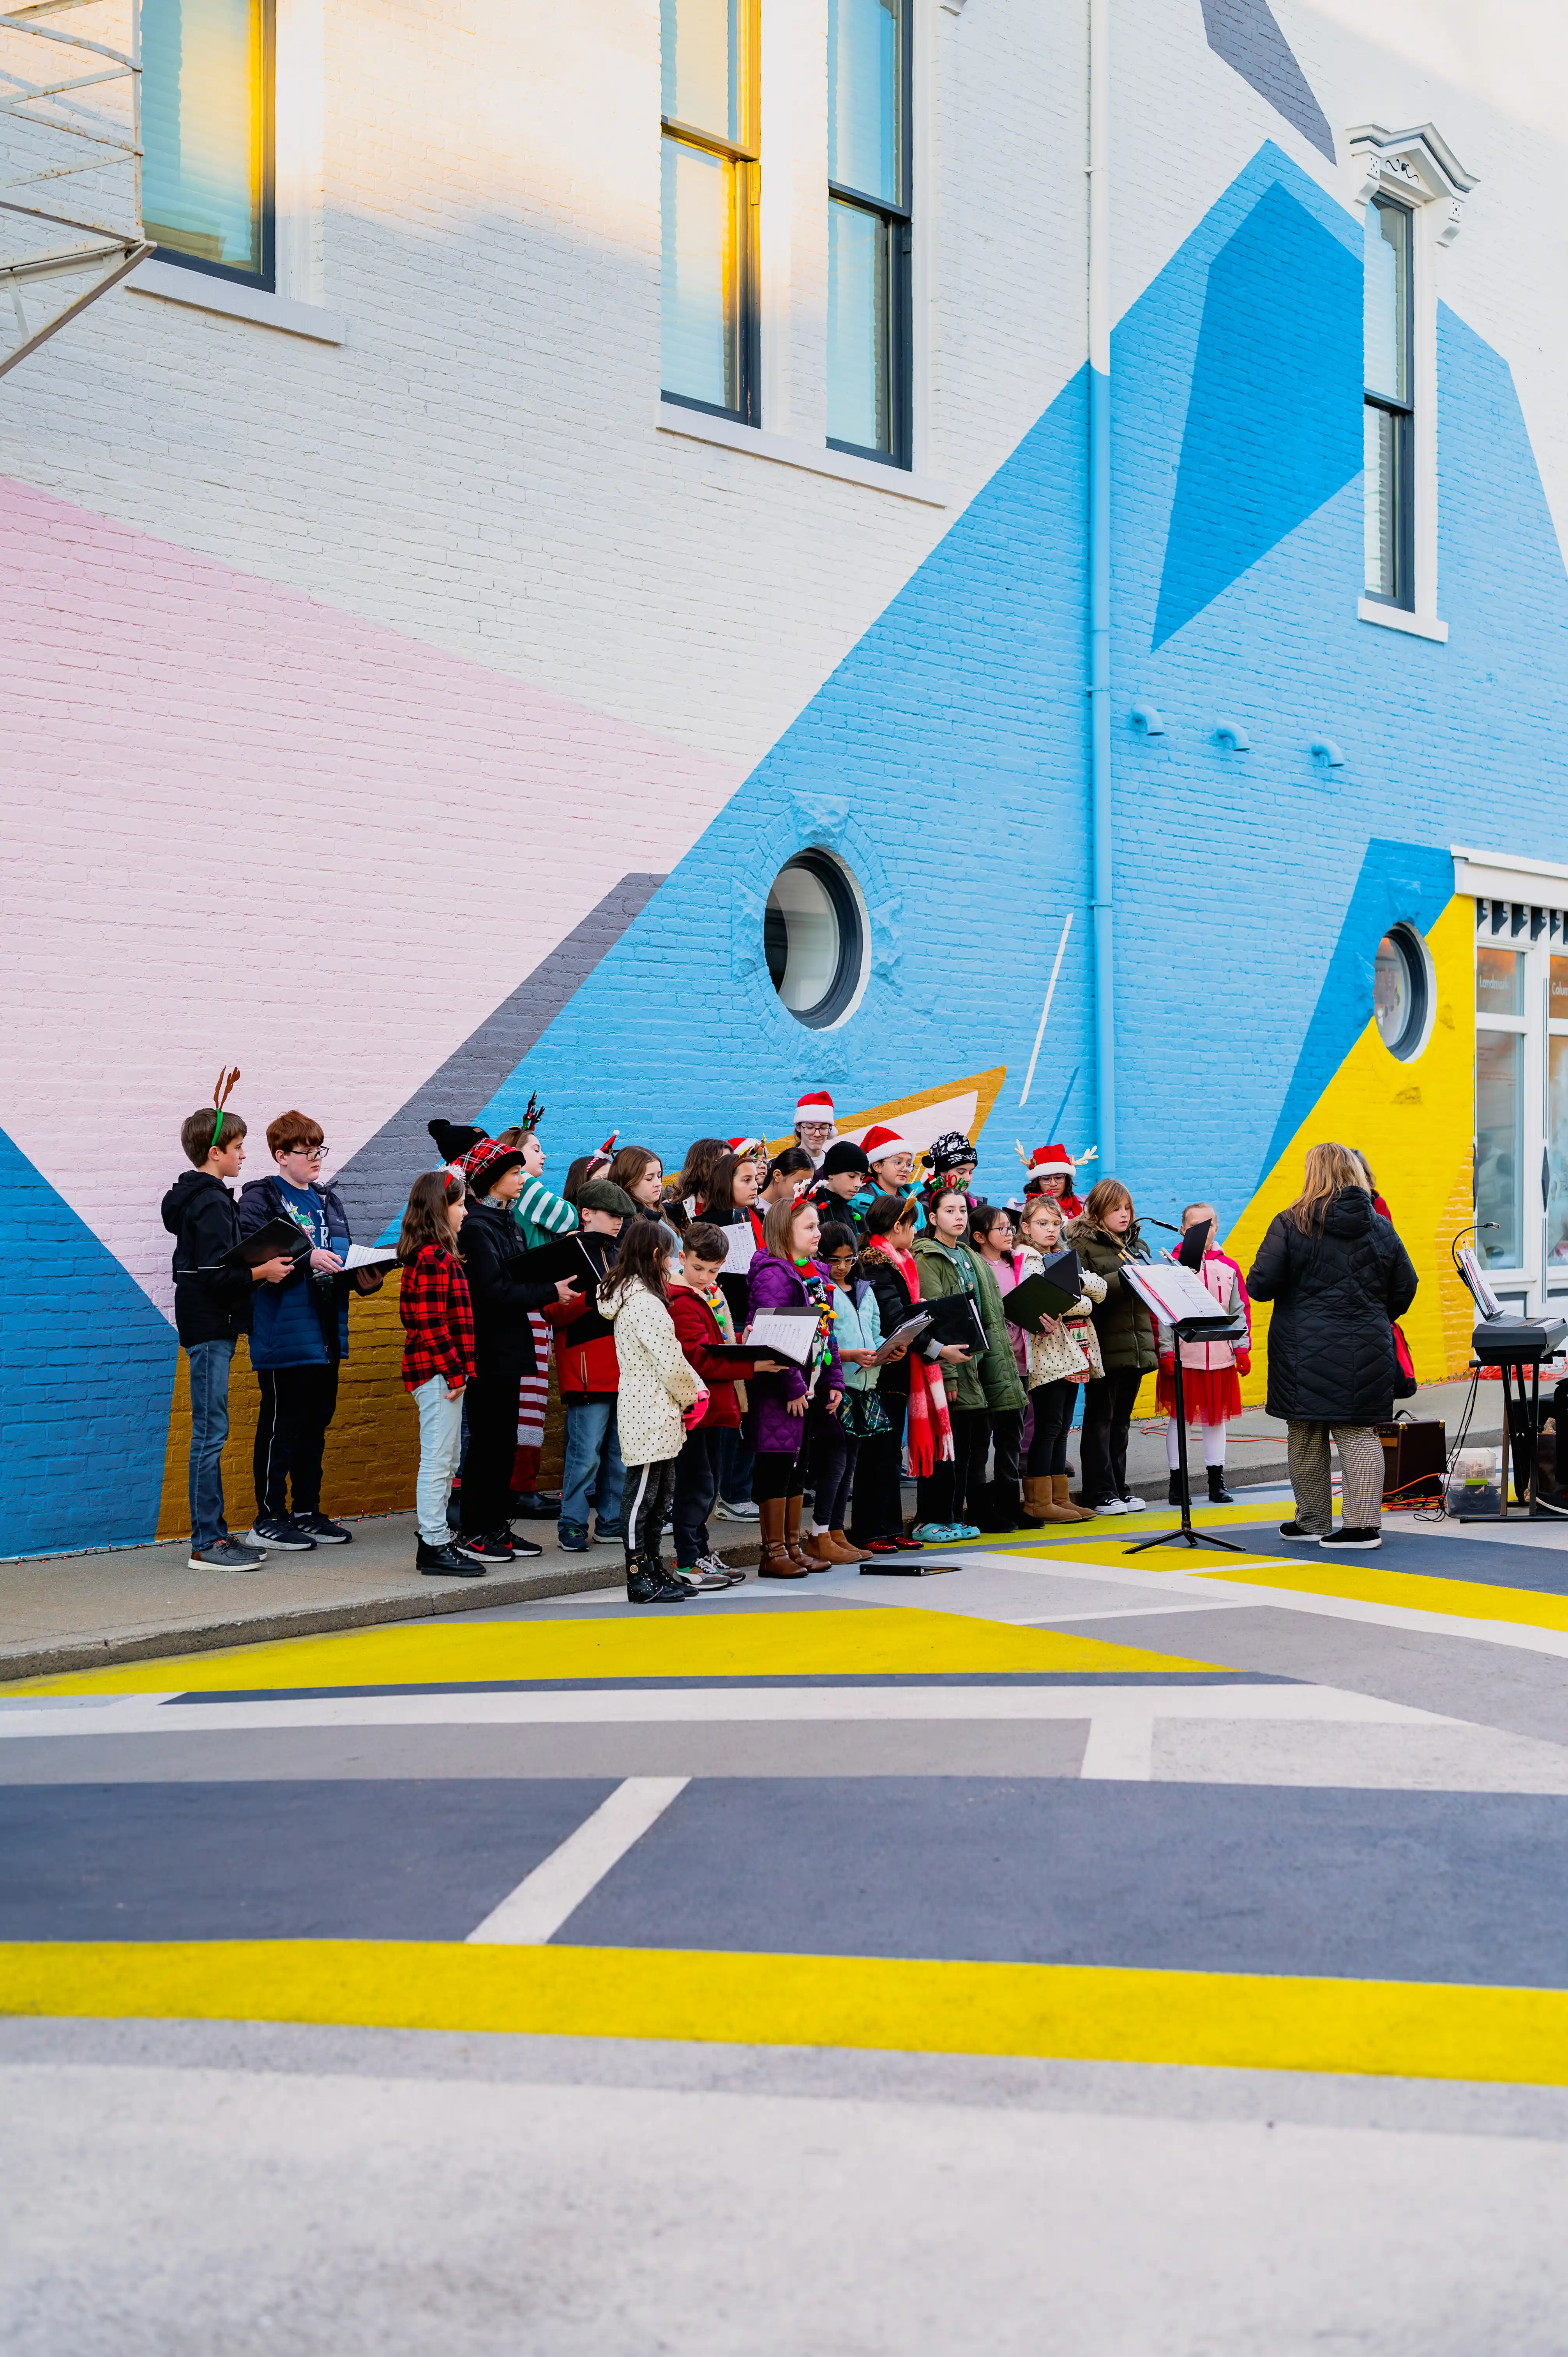 A group of people gathered outside a colorful building with blue and yellow geometric shapes on the facade.